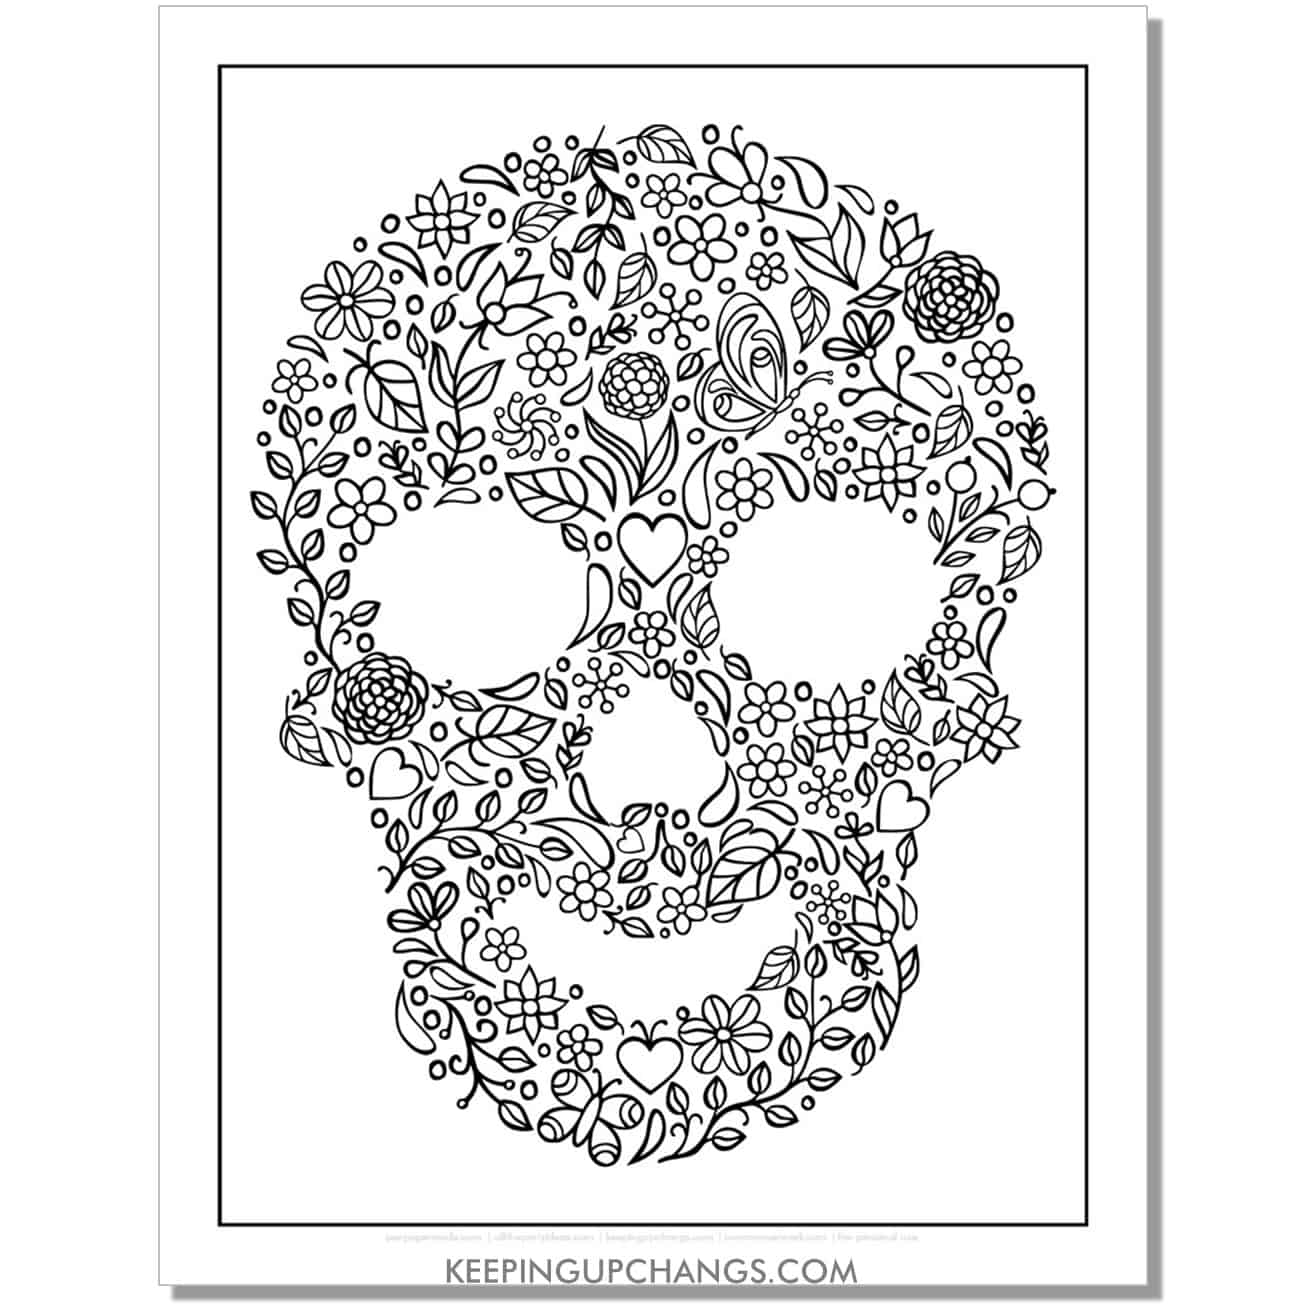 skull collage of flowers and leaves coloring page.